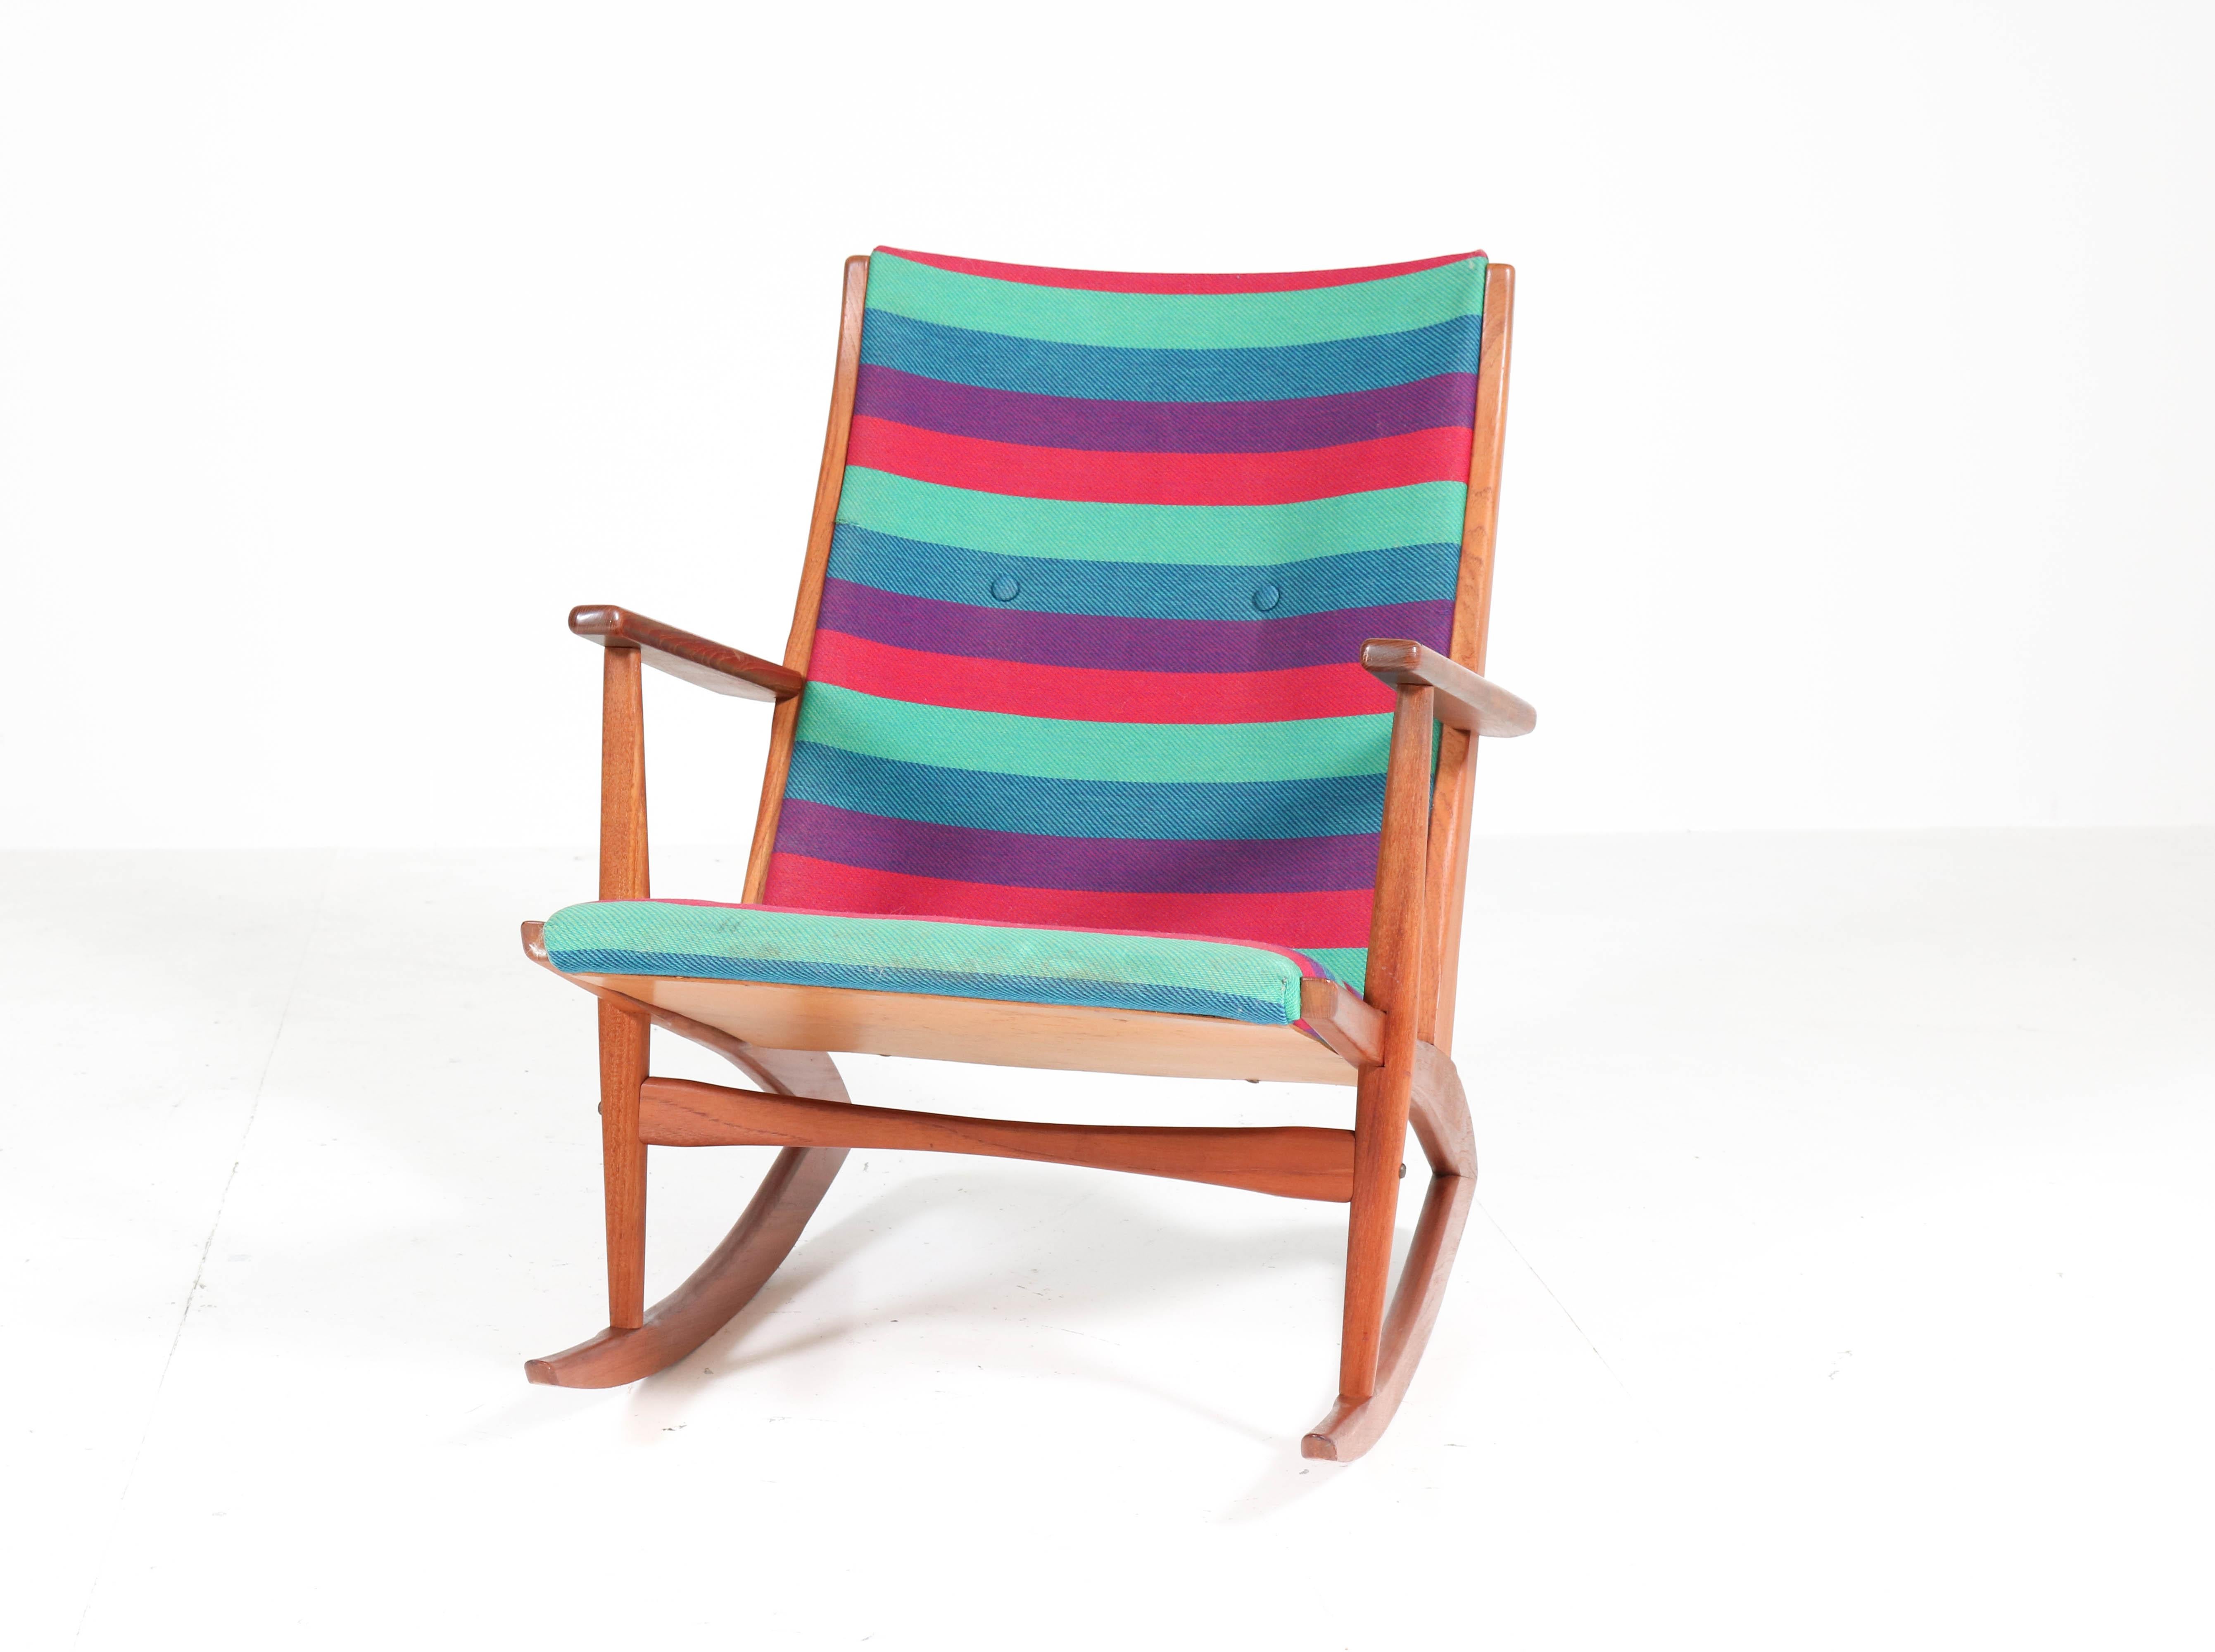 Wonderful Mid-Century Modern rocking chair.
Design by Holger George Jensen for Tønder Møbelværk.
Striking Danish design from the fifties.
Solid teak frame with original upholstery!
In very good condition with minor wear consistent with age and